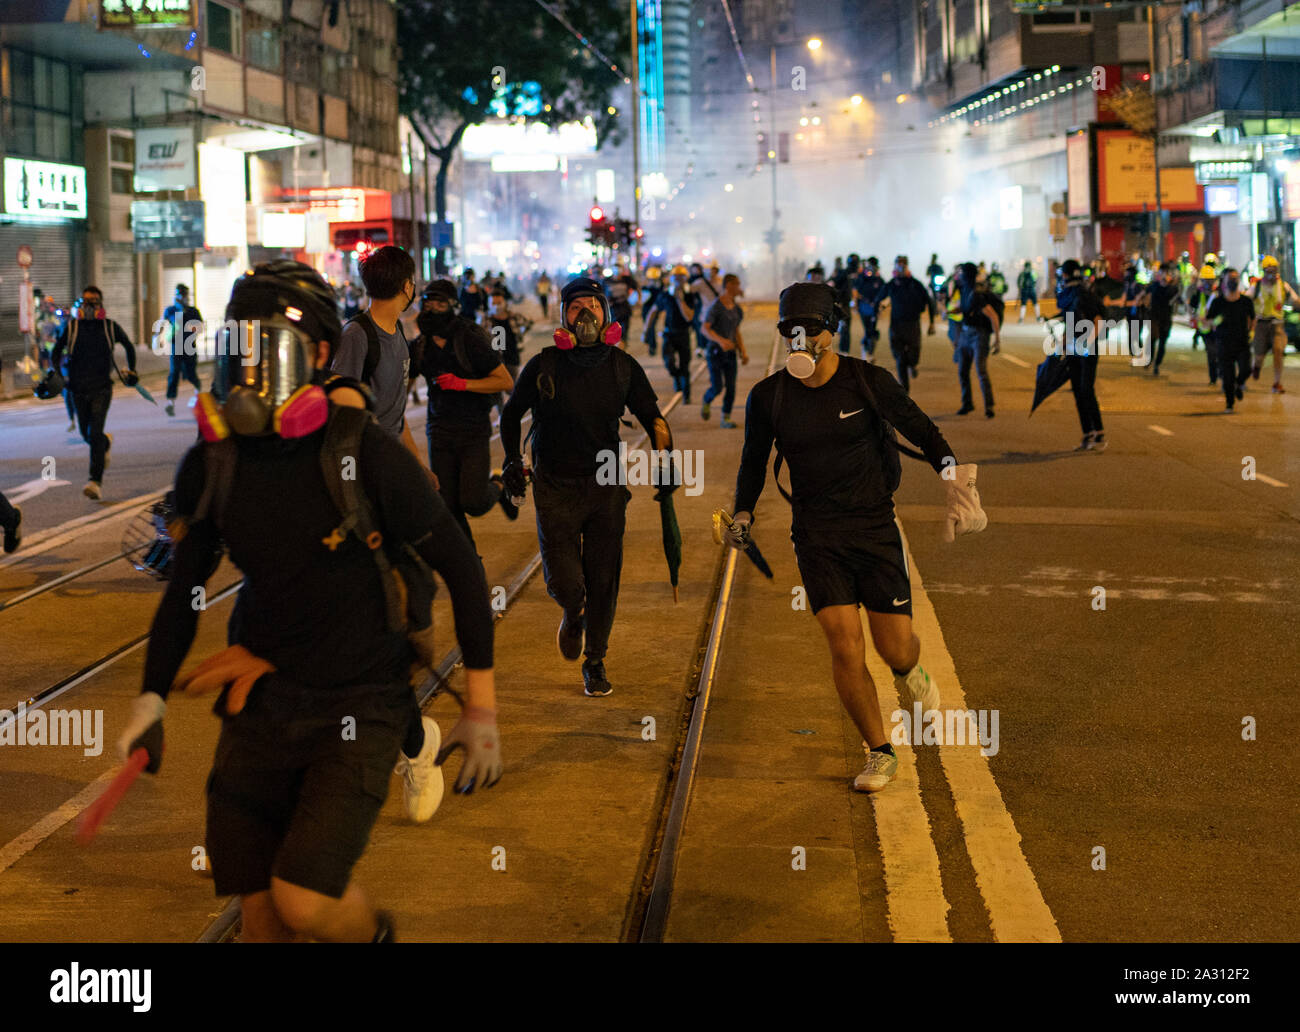 Hong Kong. 4 October 2019. Violent scenes in Hong Kong tonight with pro-democracy protestors vandalising shops and setting fire to the entrances of MTR stations. Protestors are angry with Chief Executive Carrie Lam's use of Emergency Powers to ban the wearing of masks during protests. Further demonstrations planned over the weekend. Pic; Protestors retreat from police charge and teargas attack in Causeway Bay. Iain Masterton/Alamy Live News. Credit: Iain Masterton/Alamy Live News Stock Photo